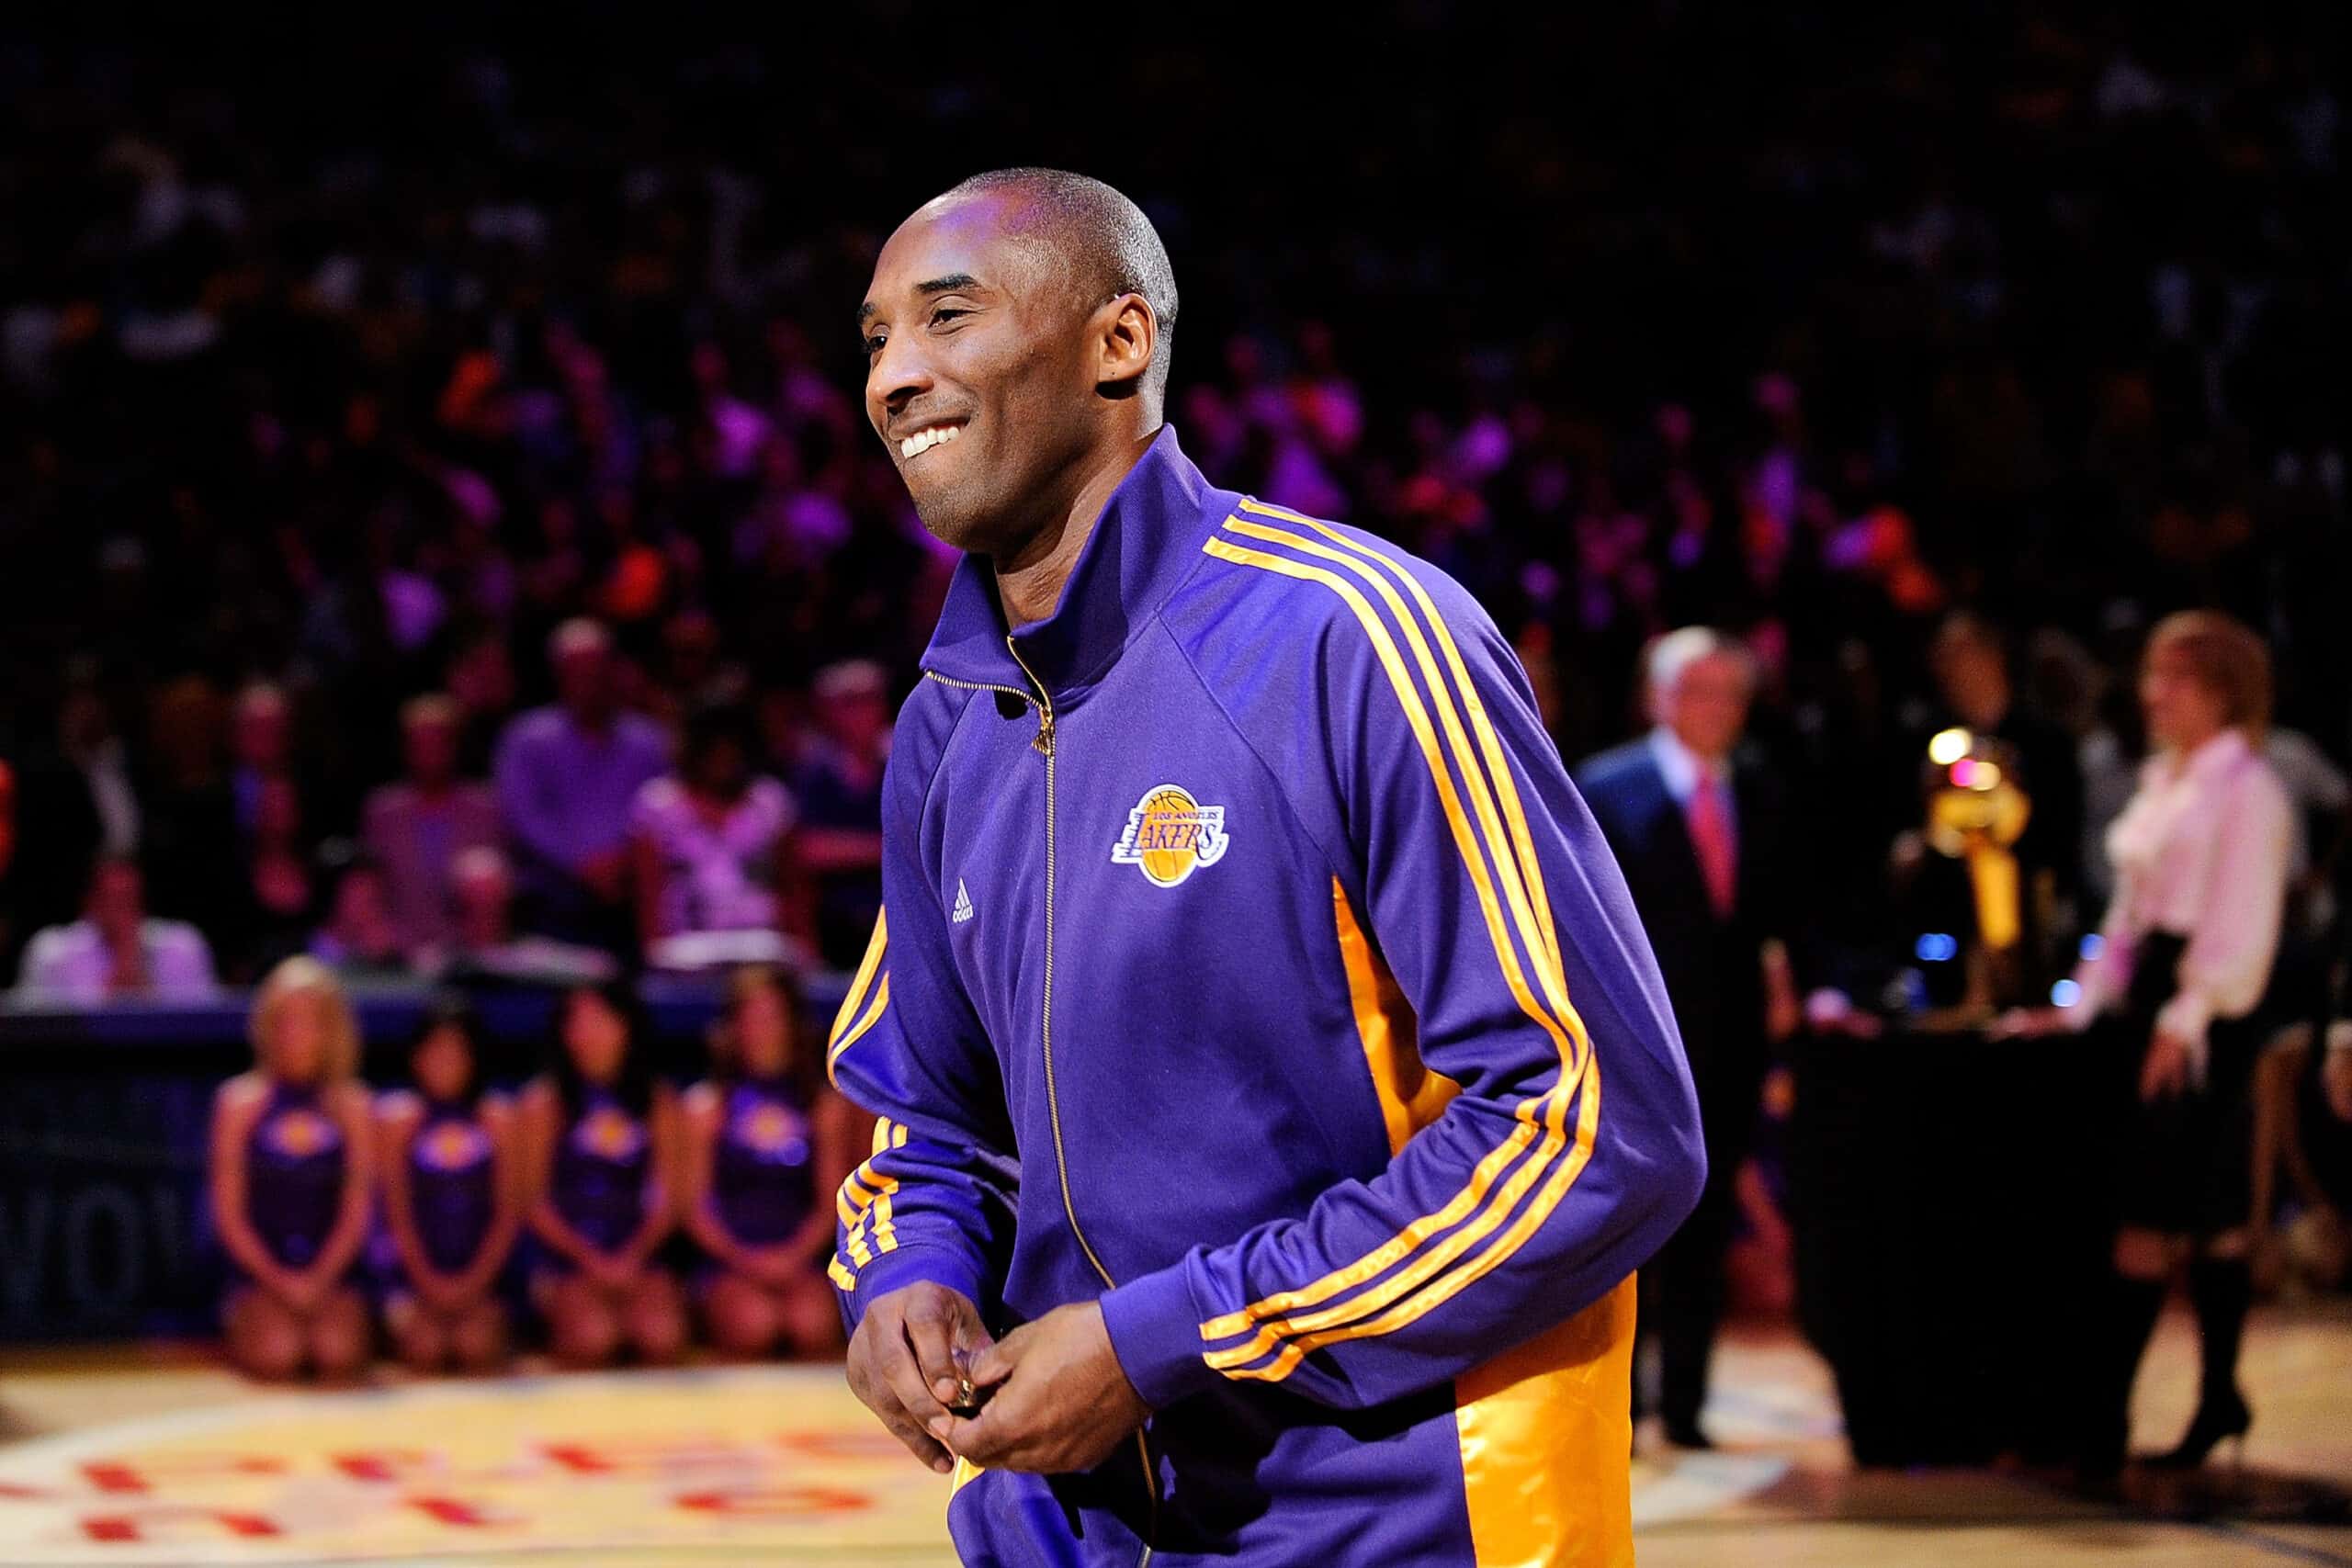 Kobe Bryant's Near-Trade to Pistons: The Lakers Legend Who Almost Left